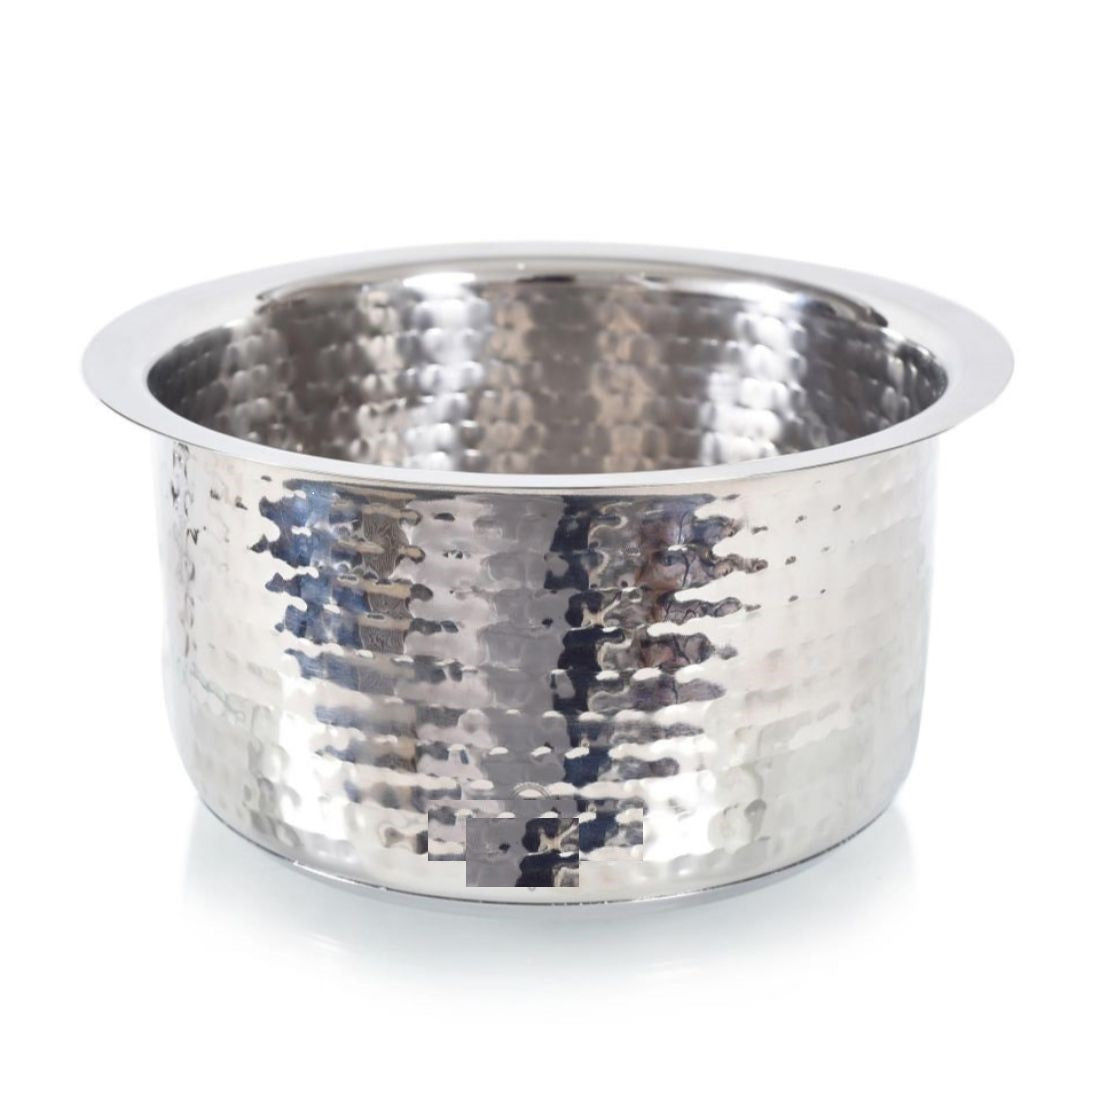 Aluminium Indian Hammered Deep Pot 14.2L with Lid No24 Round Heavy Duty 6225